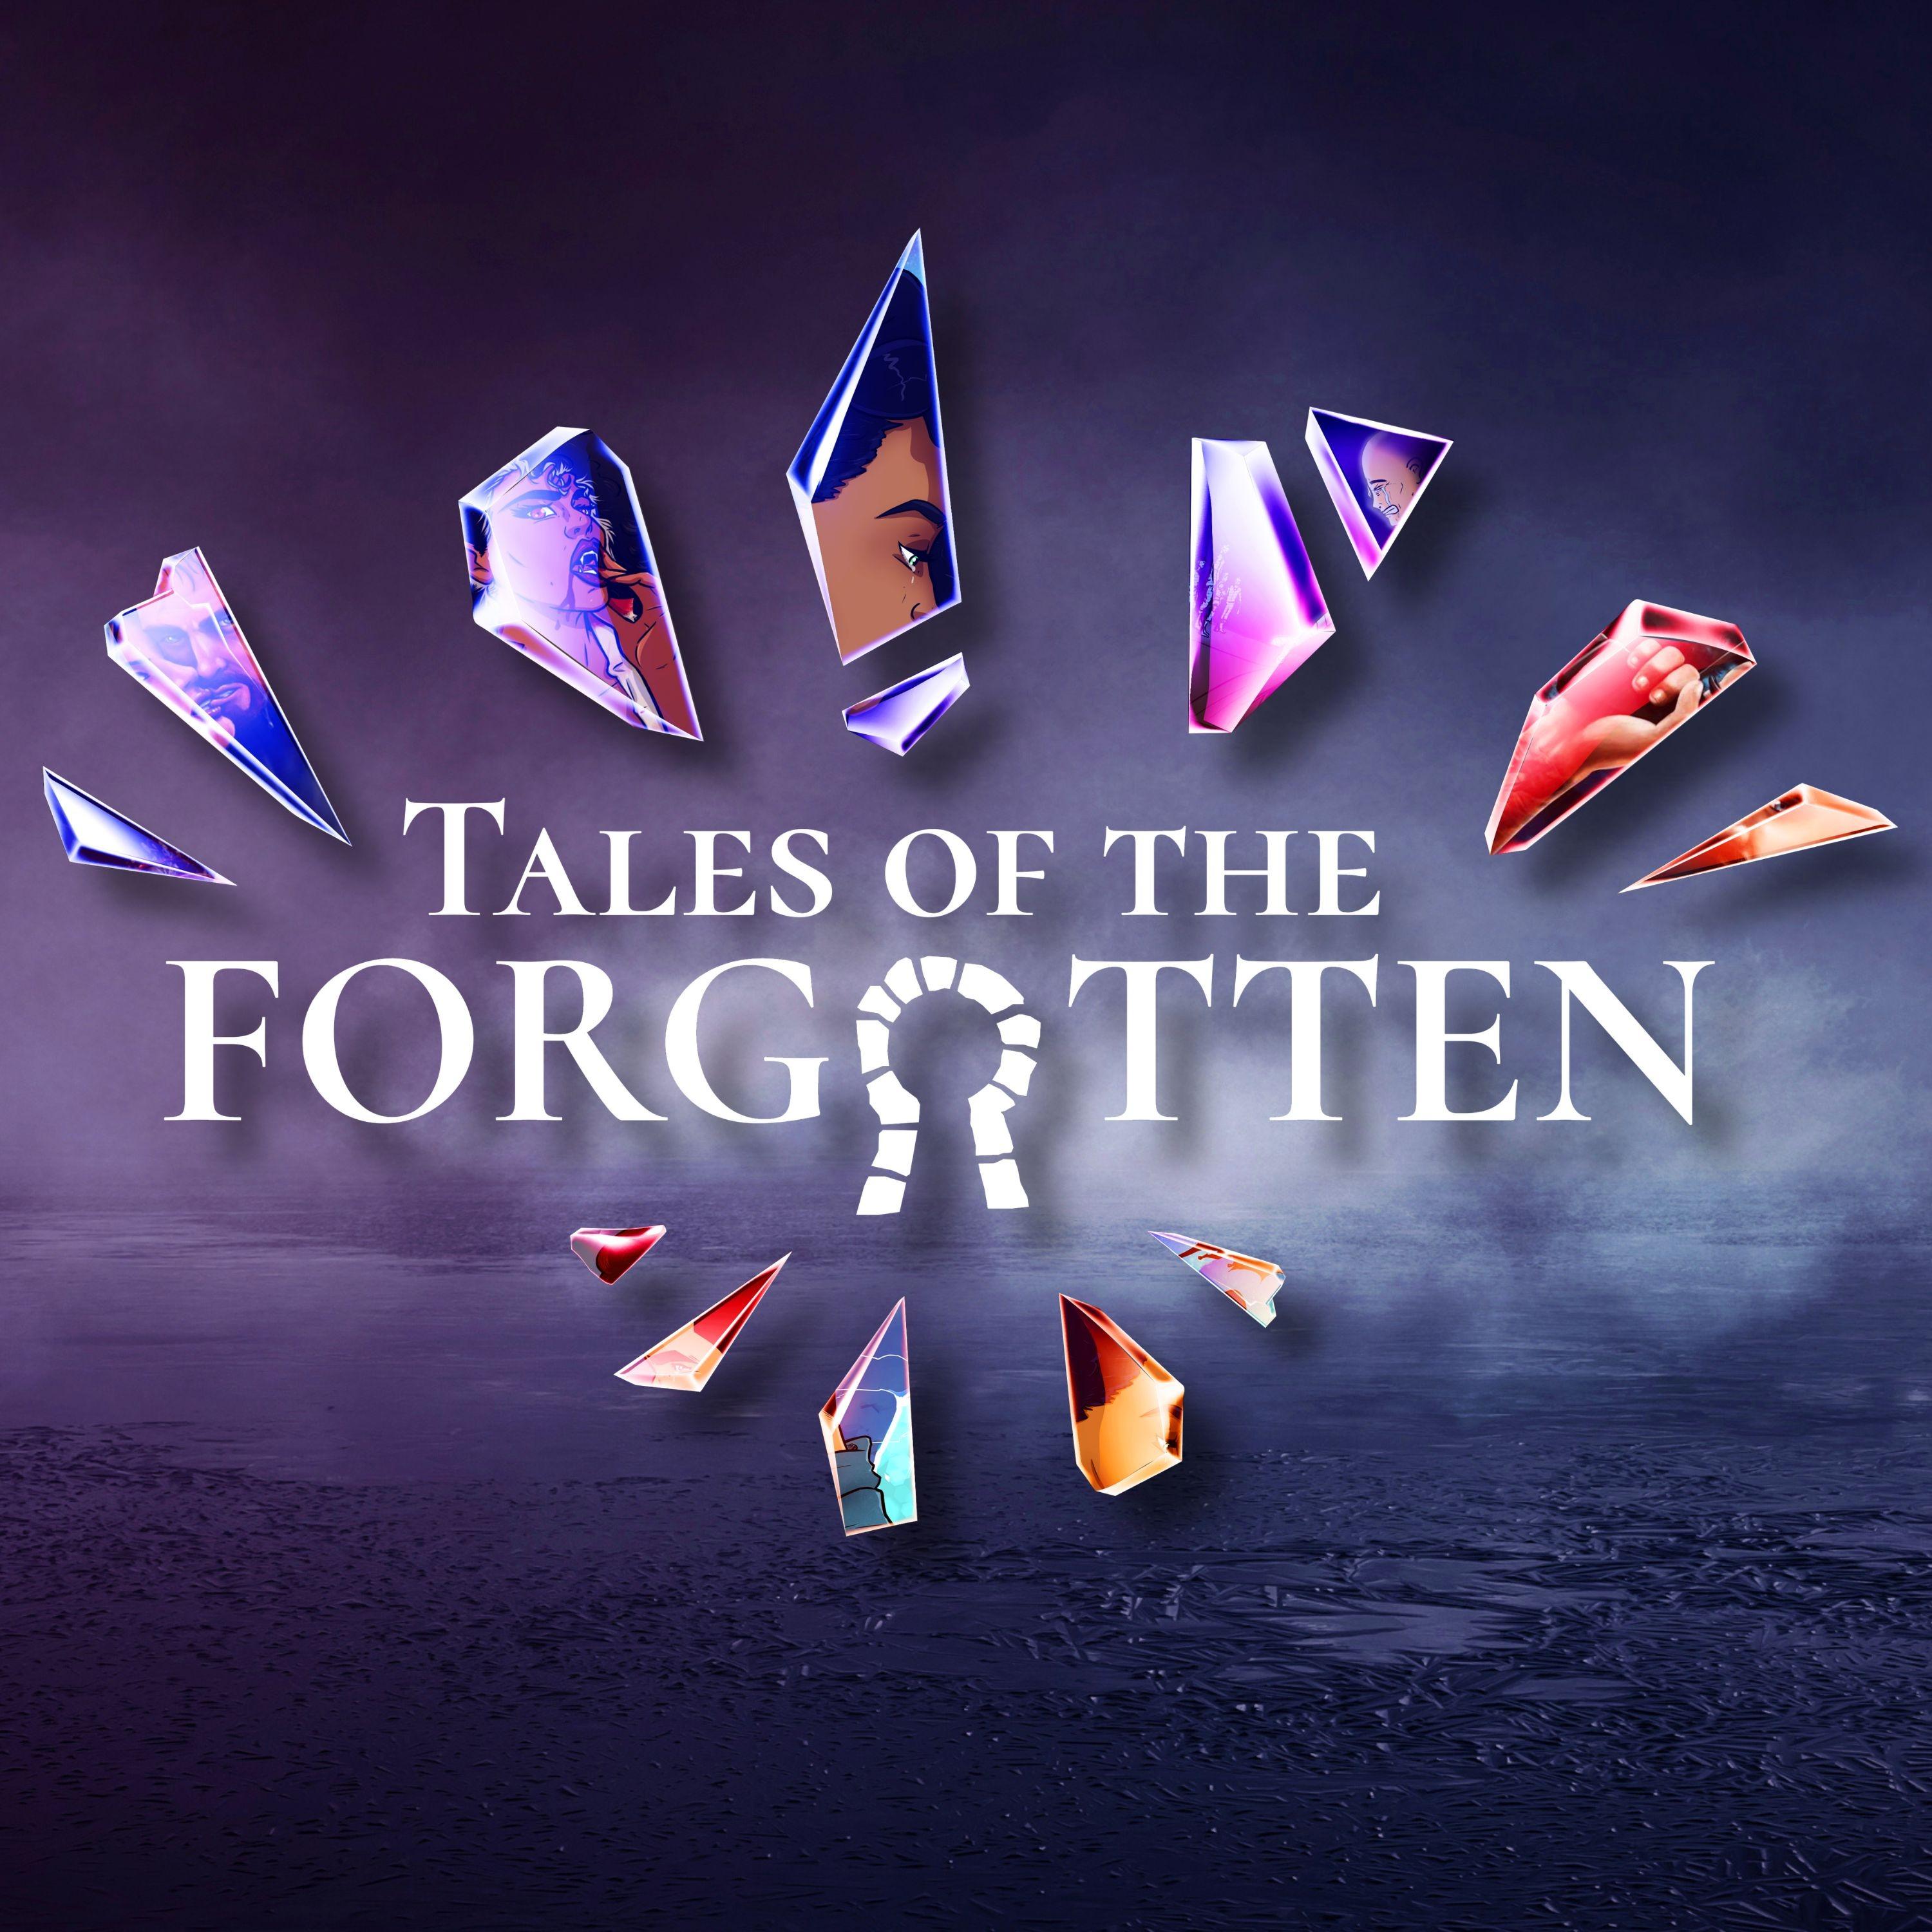 Tales of the Forgotten